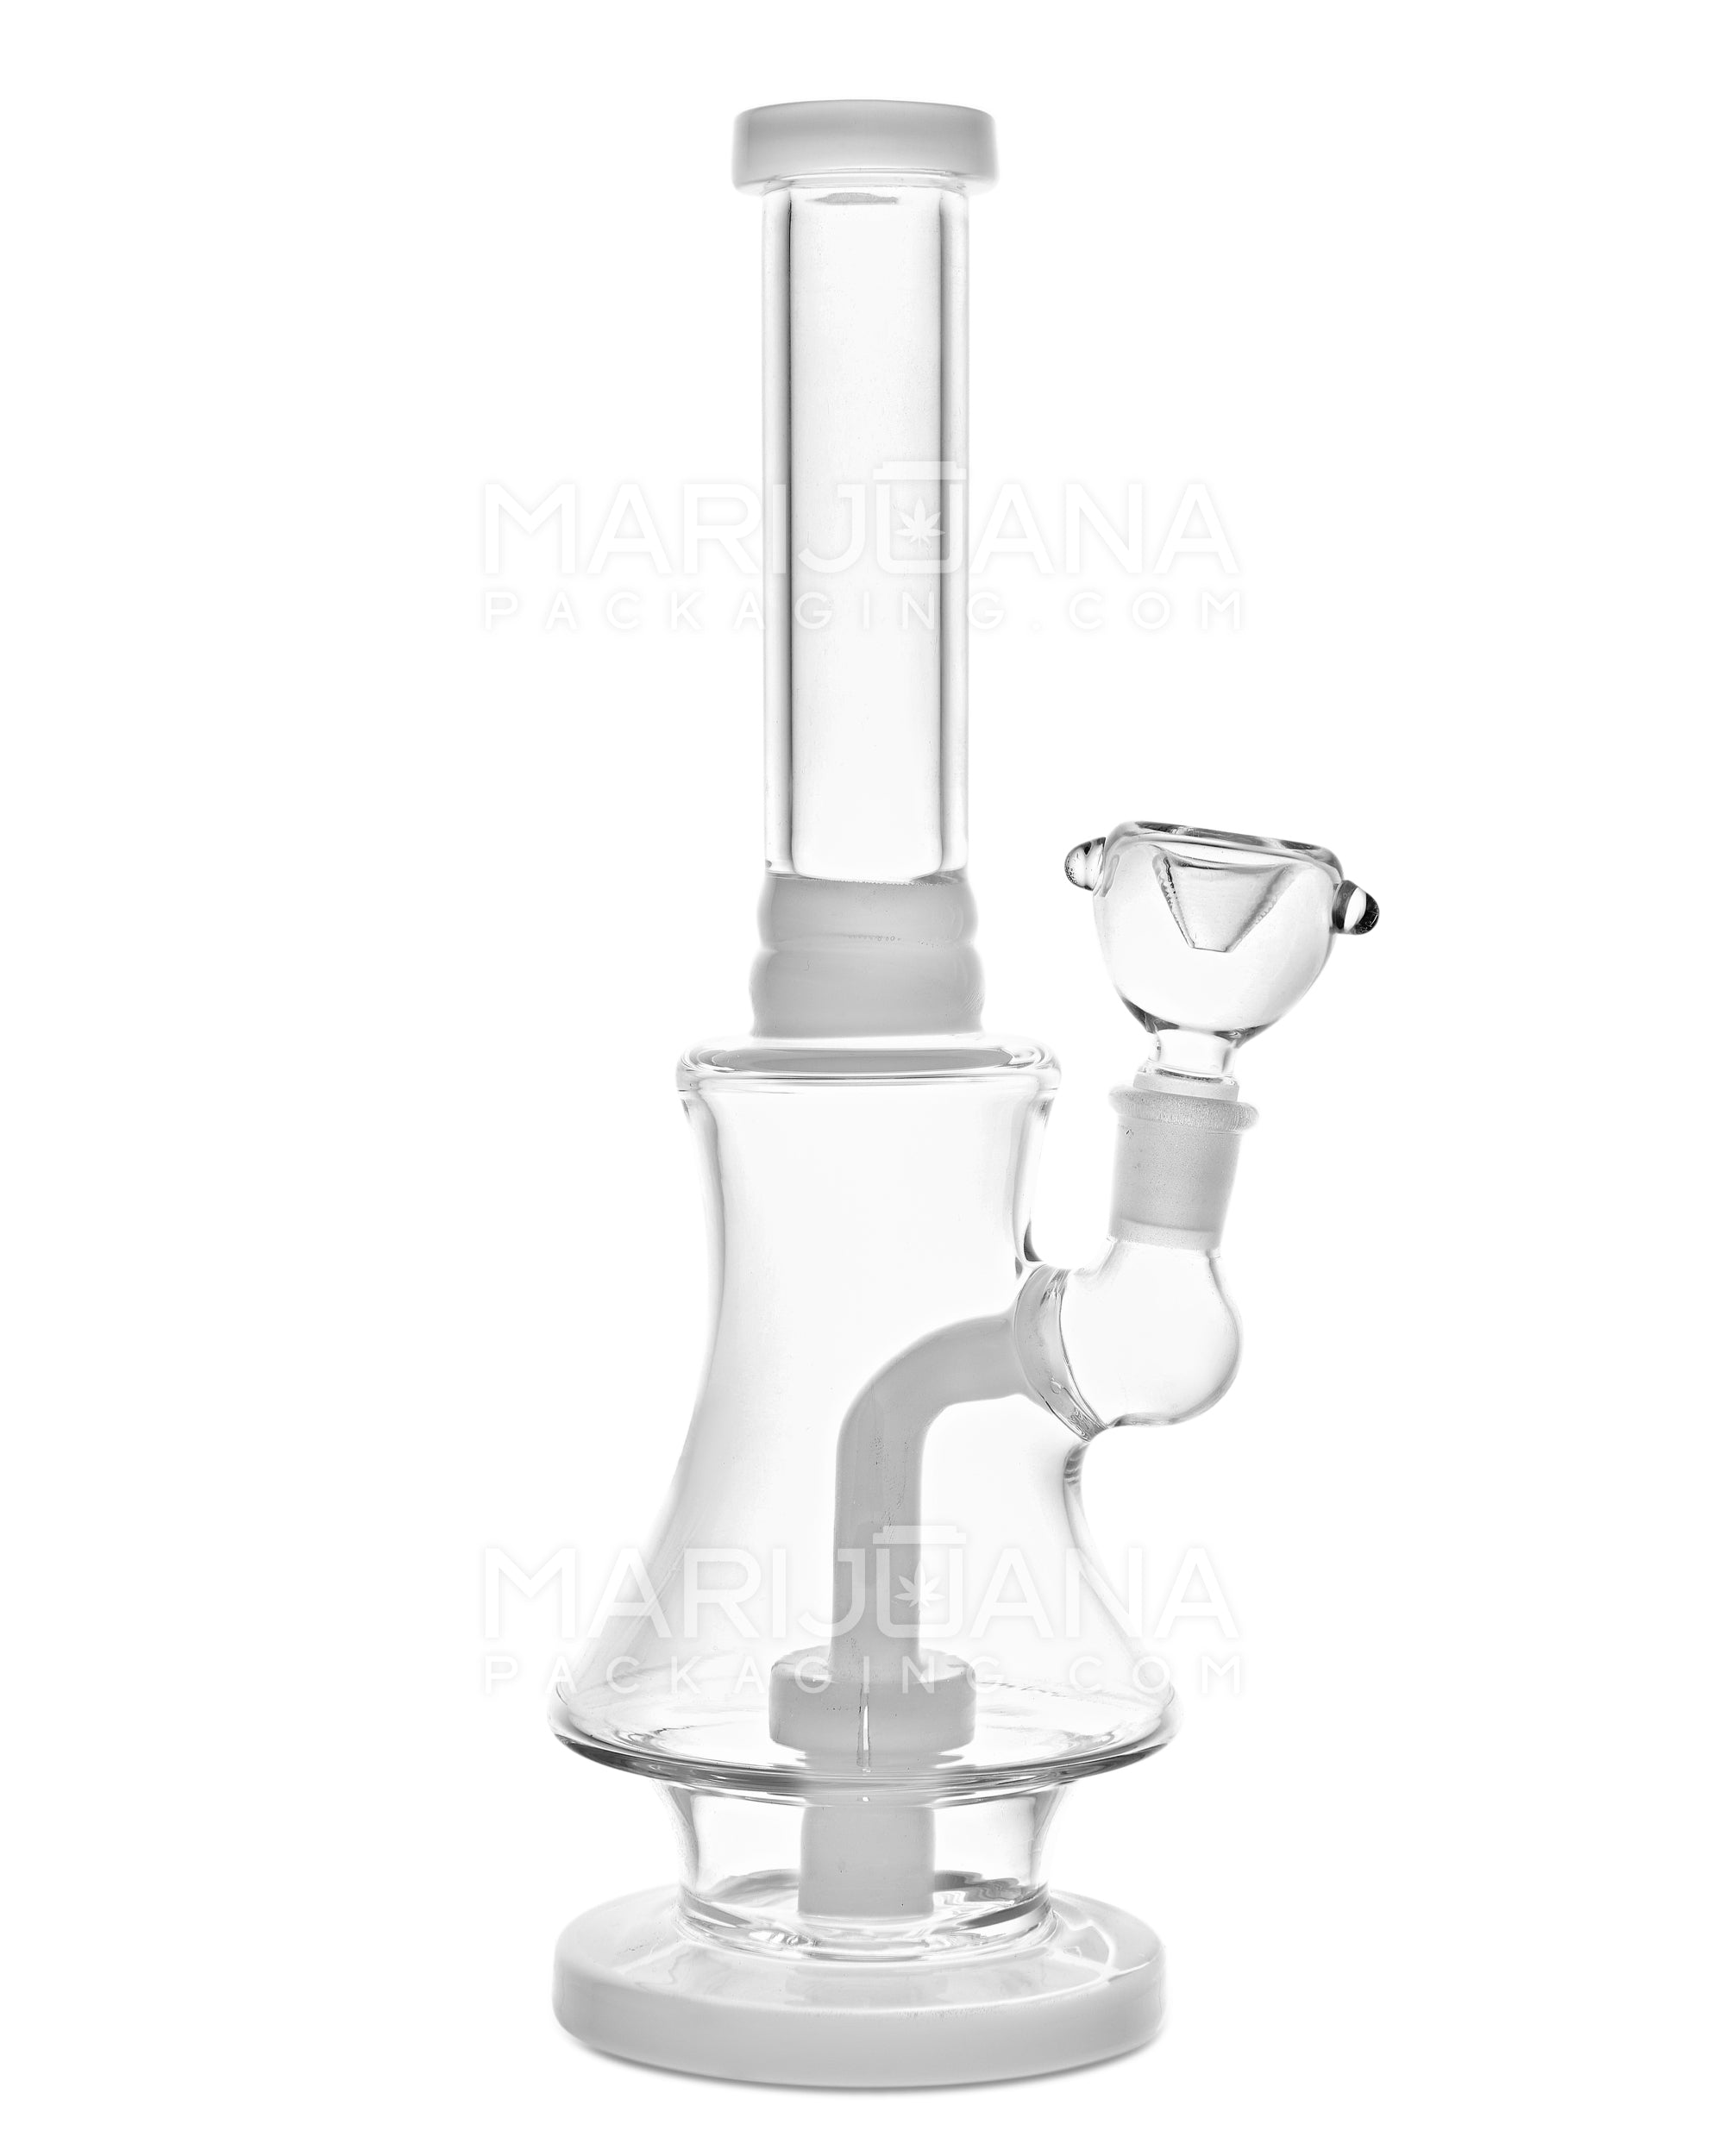 Straight Neck Showerhead Perc Glass Bell Water Pipe | 10in Tall - 14mm Bowl - White - 1